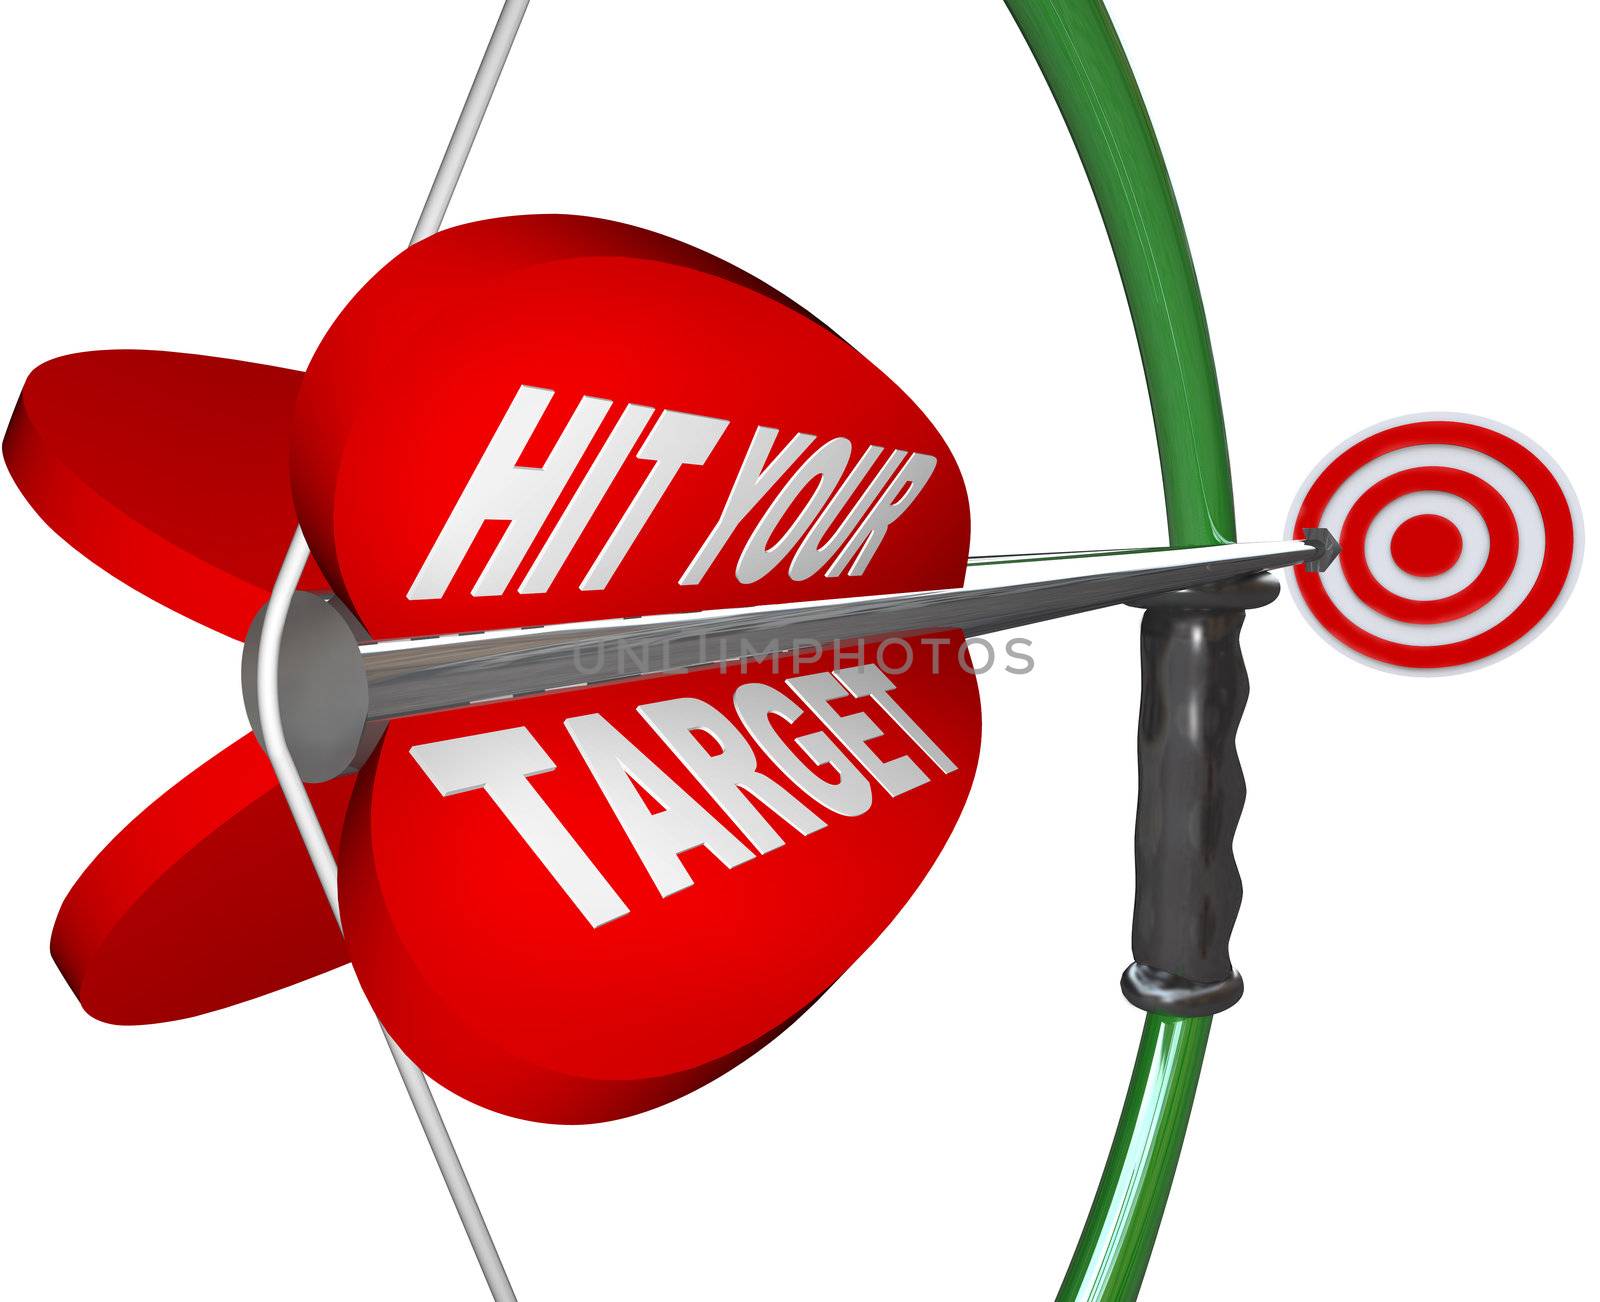 An arrow  with the words Hit Your Target is pulled back on the bow and is aimed at a red bulls-eye target, symbolizing the aim and focus it takes to achieve your goal and reach your objective of success